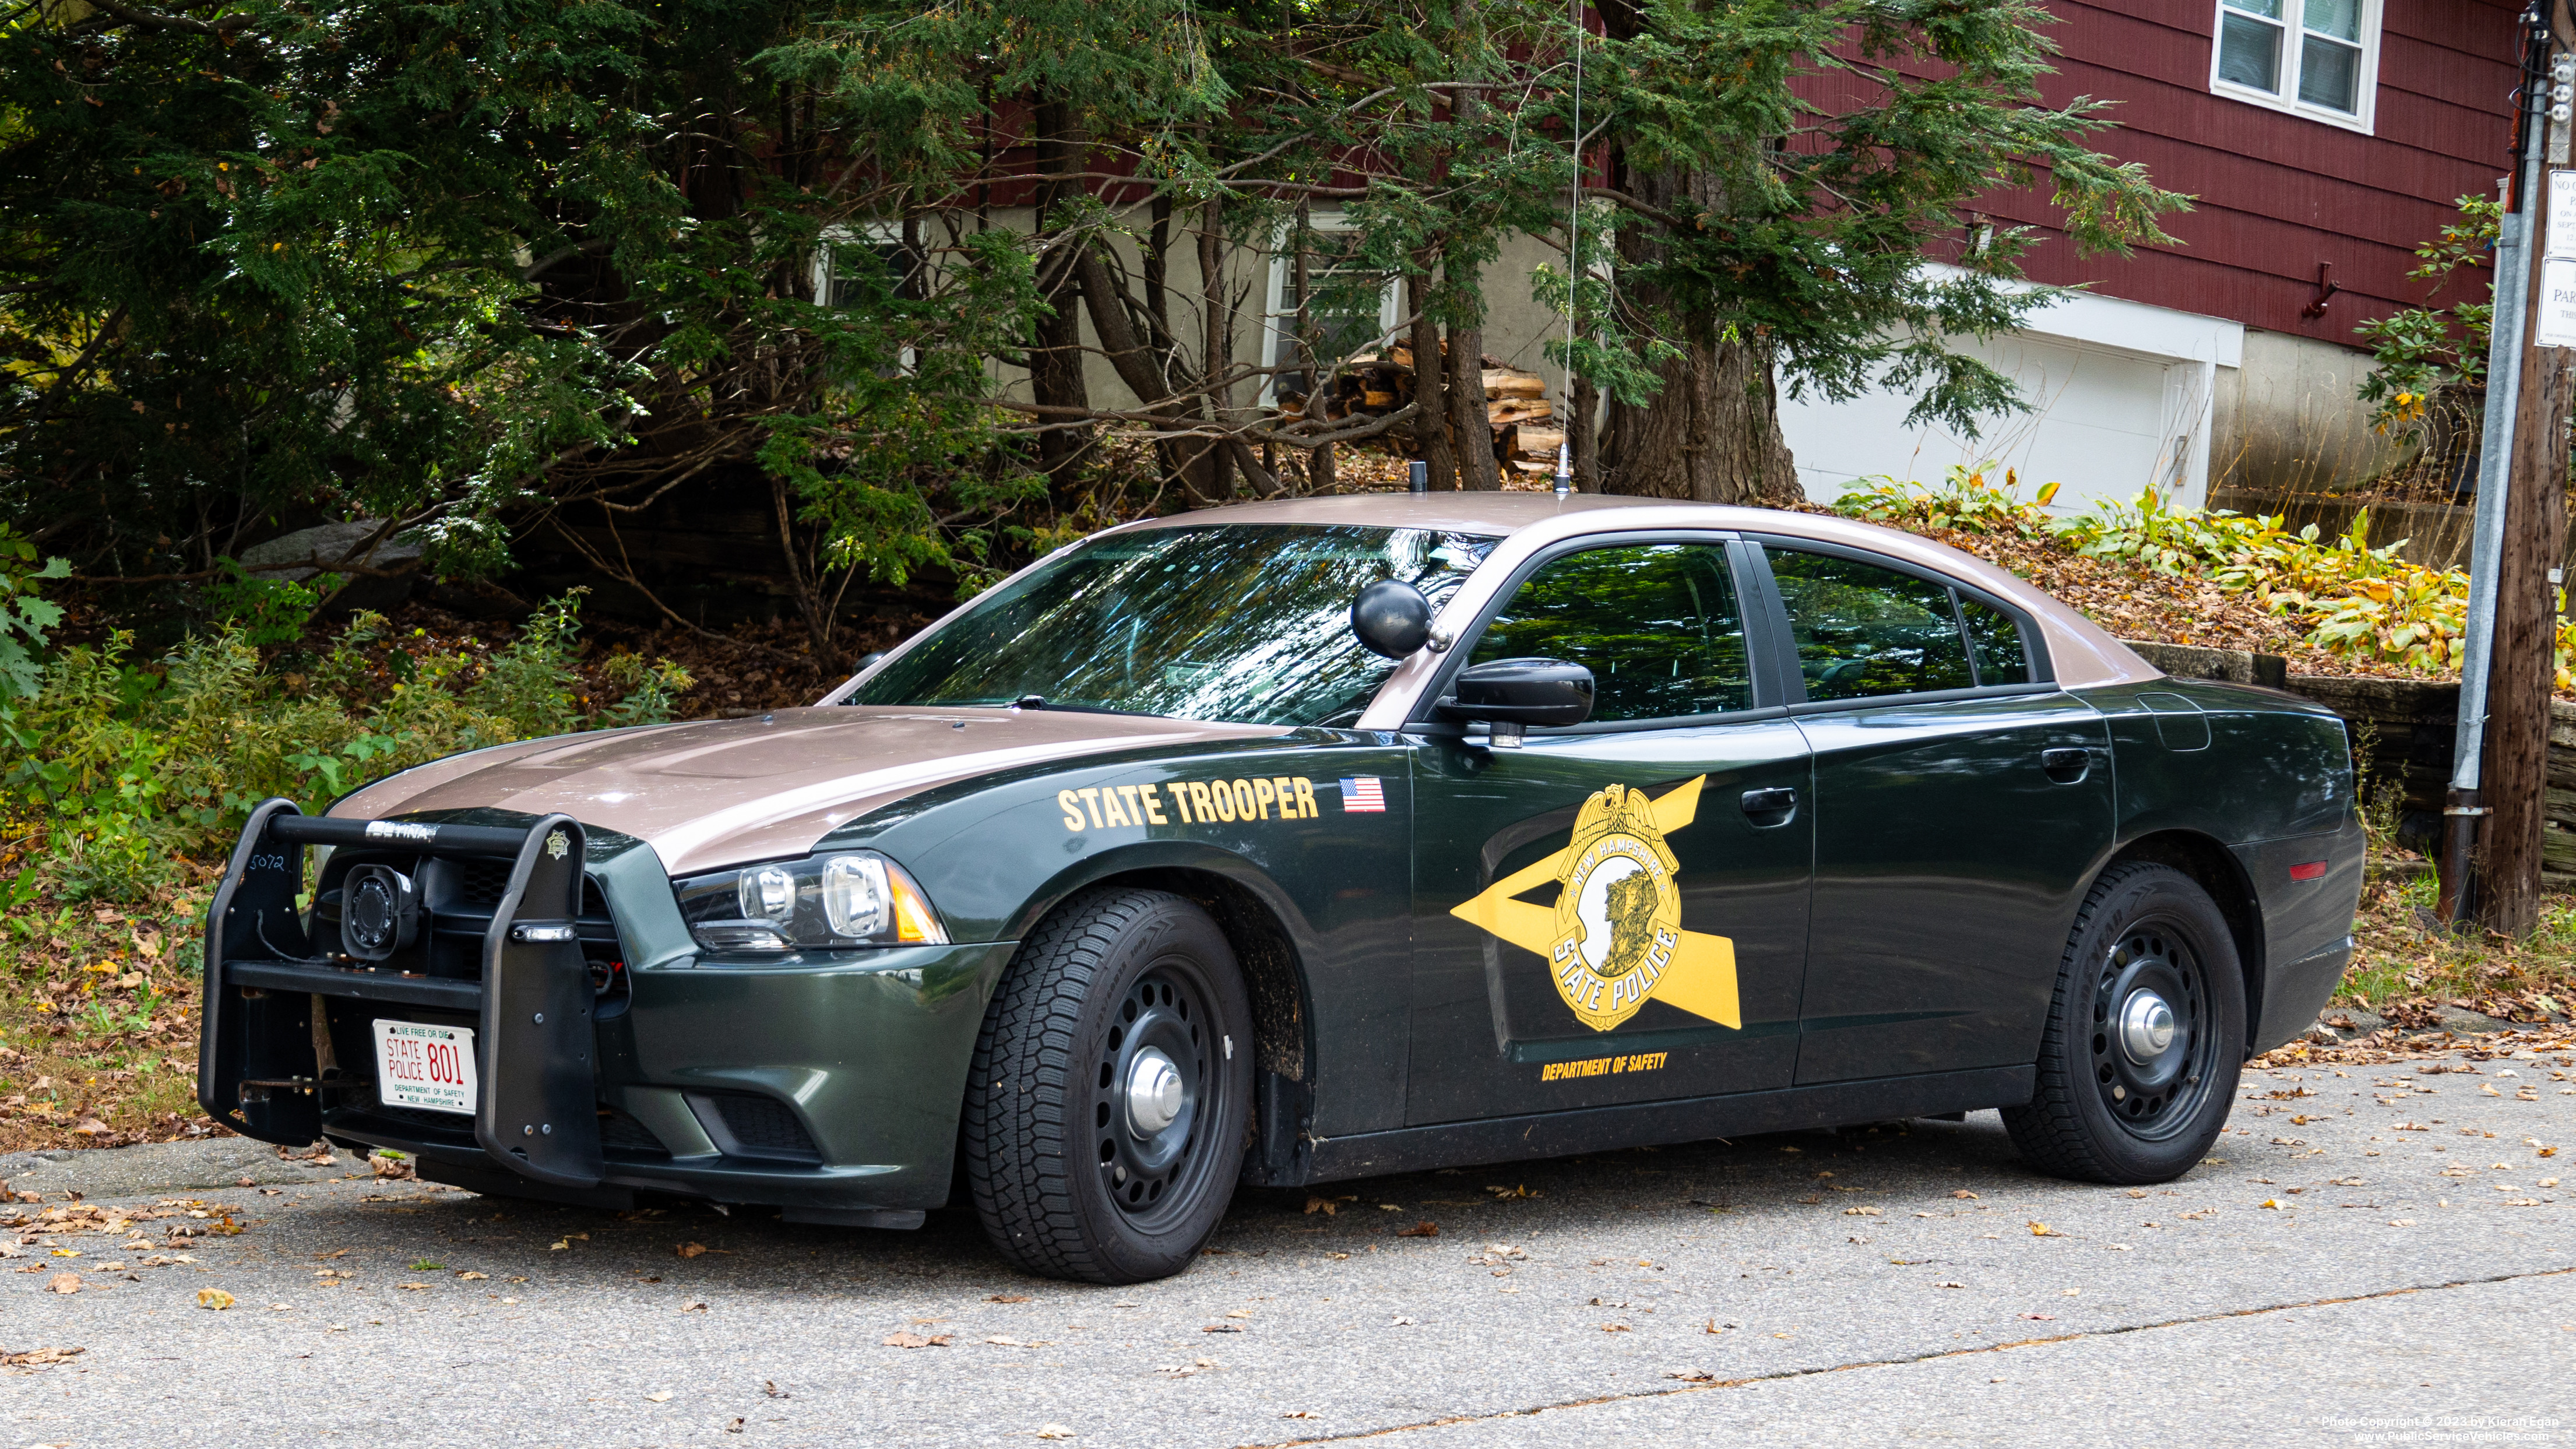 A photo  of New Hampshire State Police
            Cruiser 801, a 2014 Dodge Charger             taken by Kieran Egan